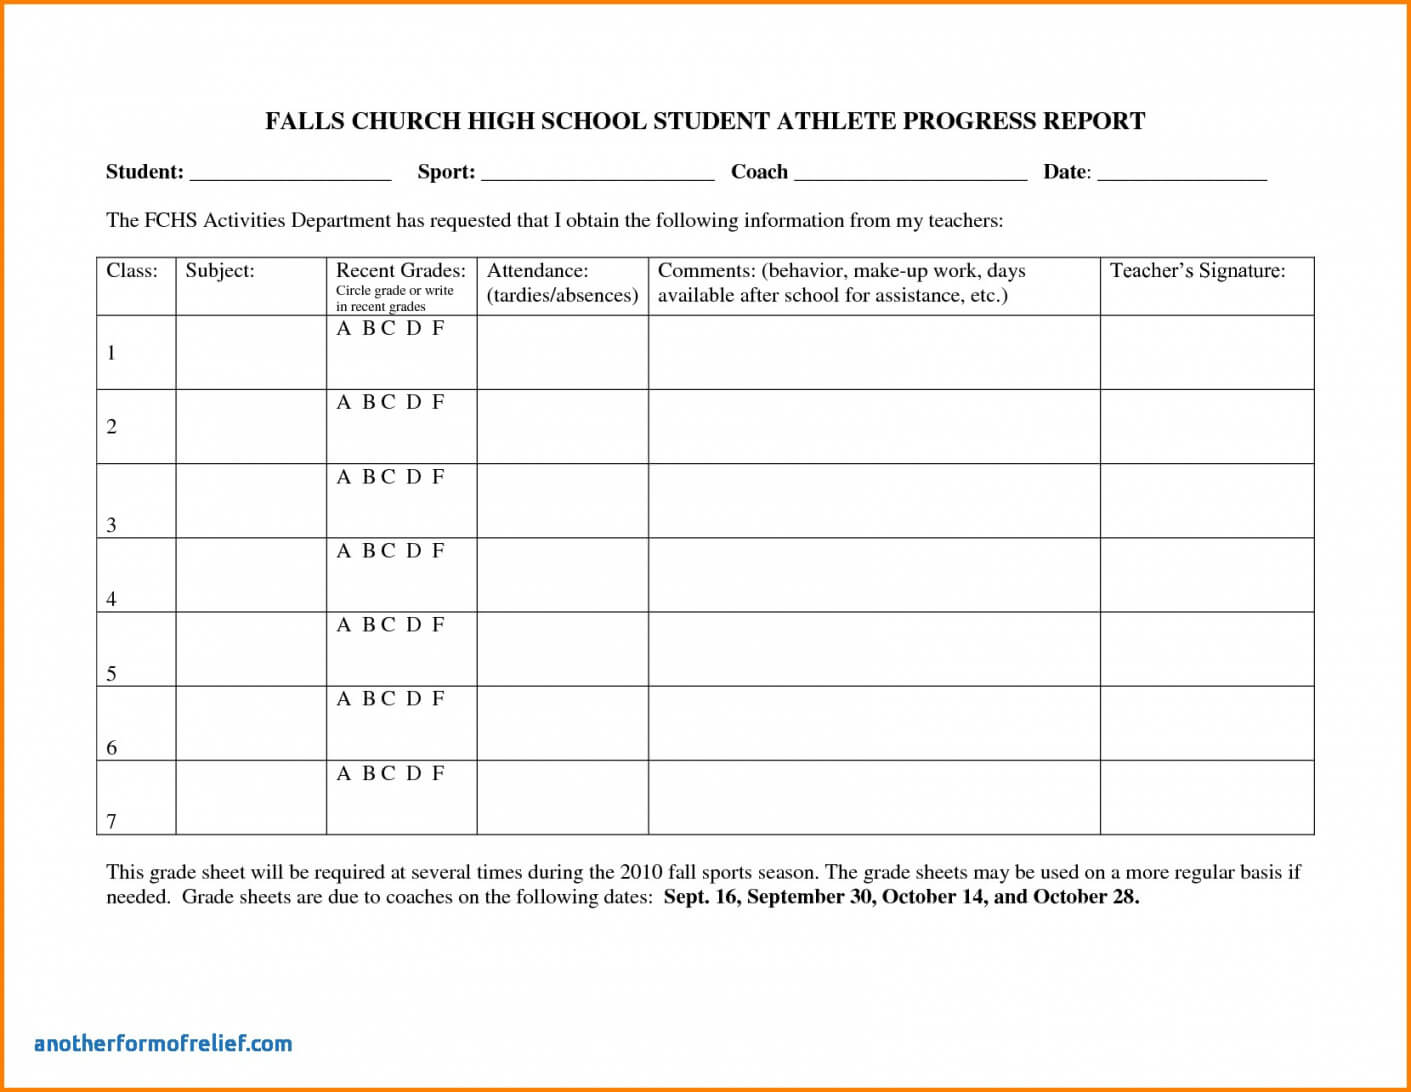 Weekly Accomplishment Report Template - Atlantaauctionco Throughout Weekly Accomplishment Report Template